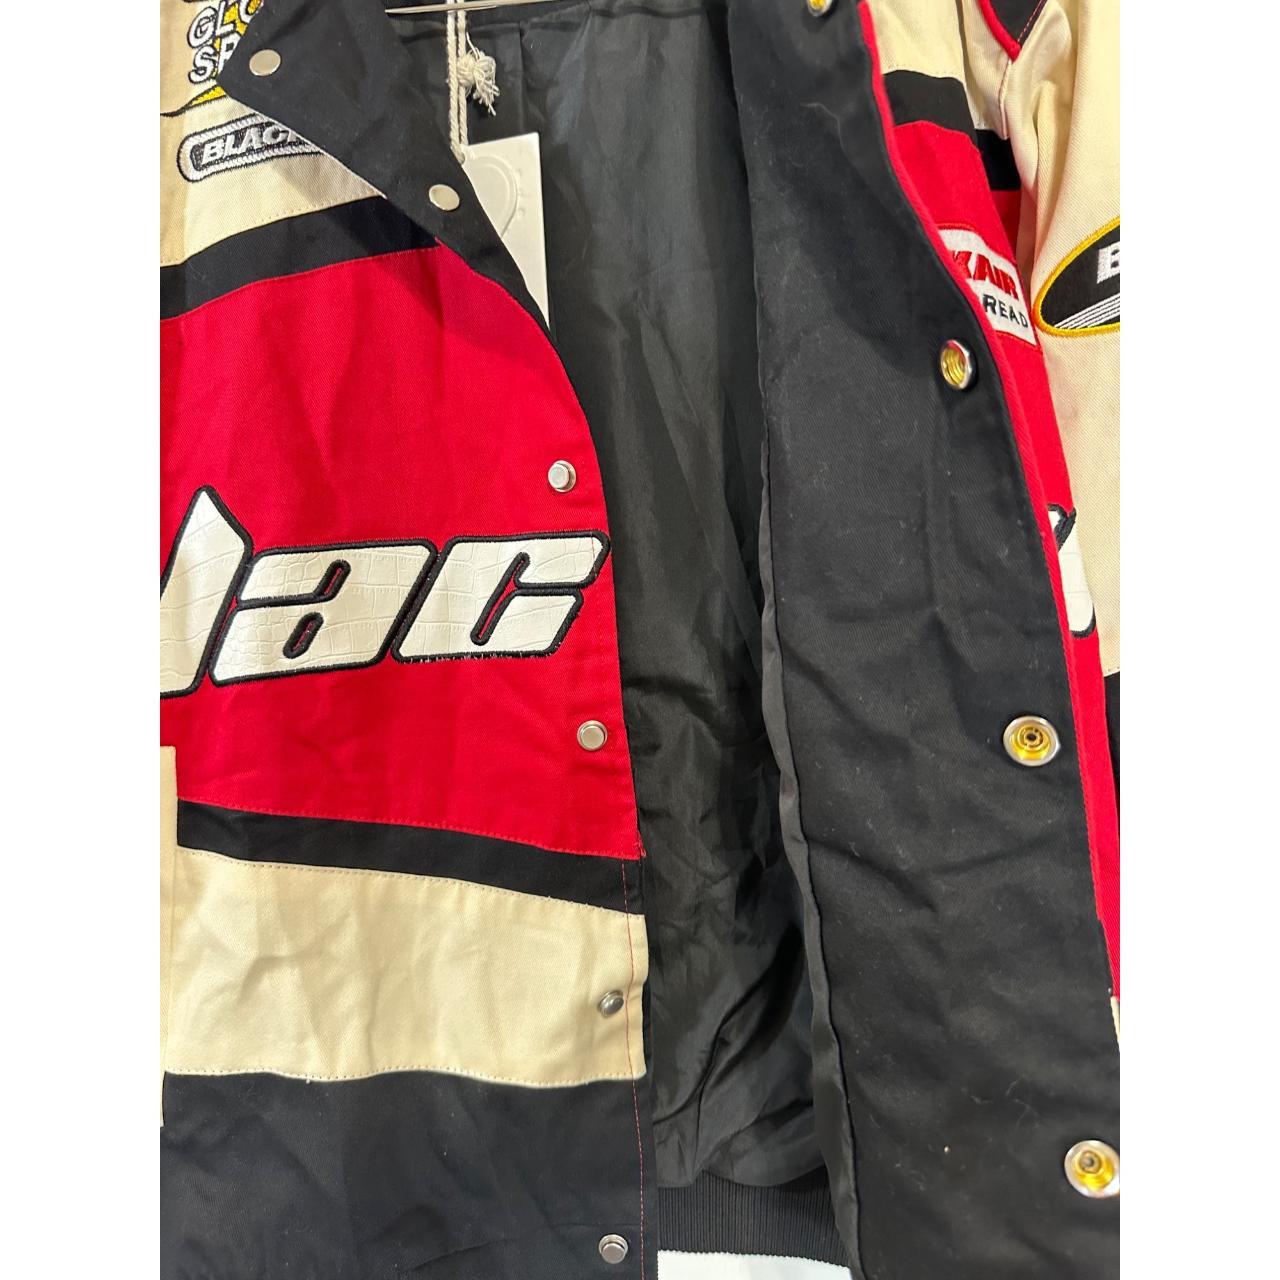 Elfric Eden Racing Jacket New with Tags Size... - Depop